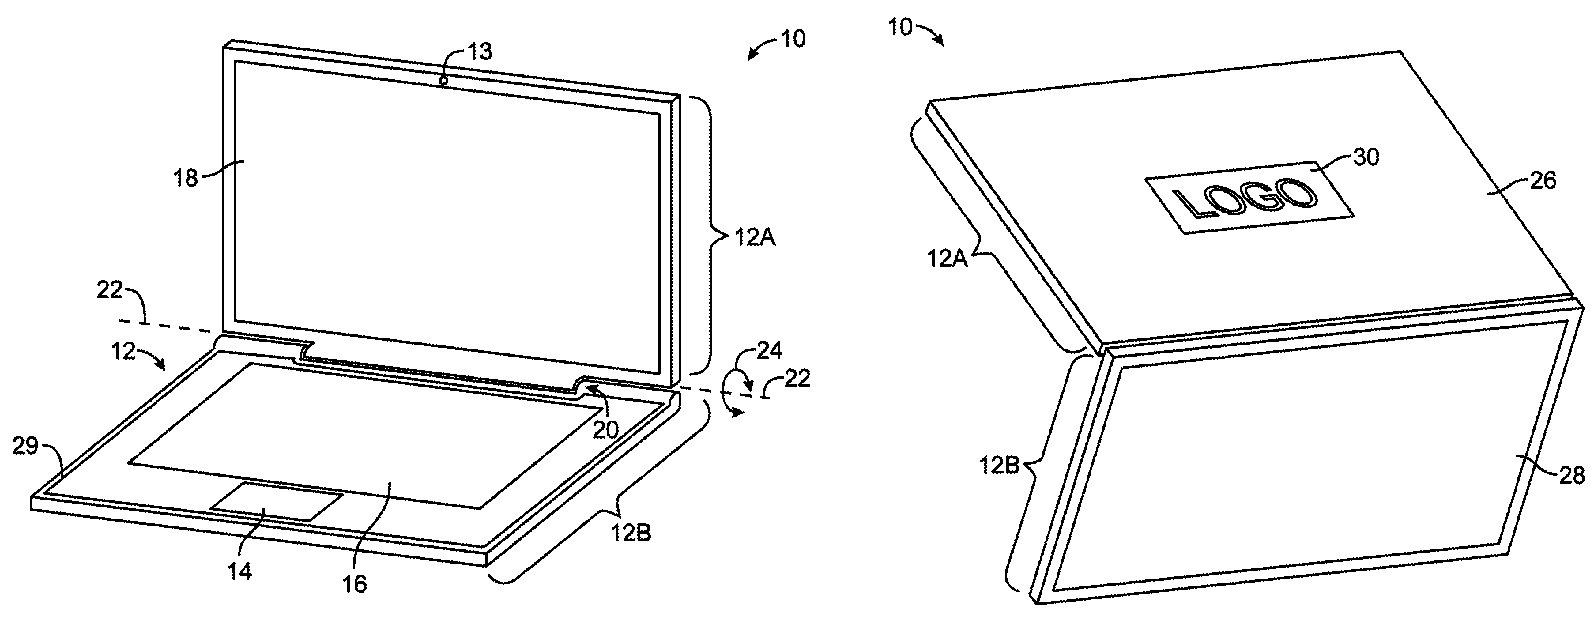 Apple-Patent „Electronic device display module“